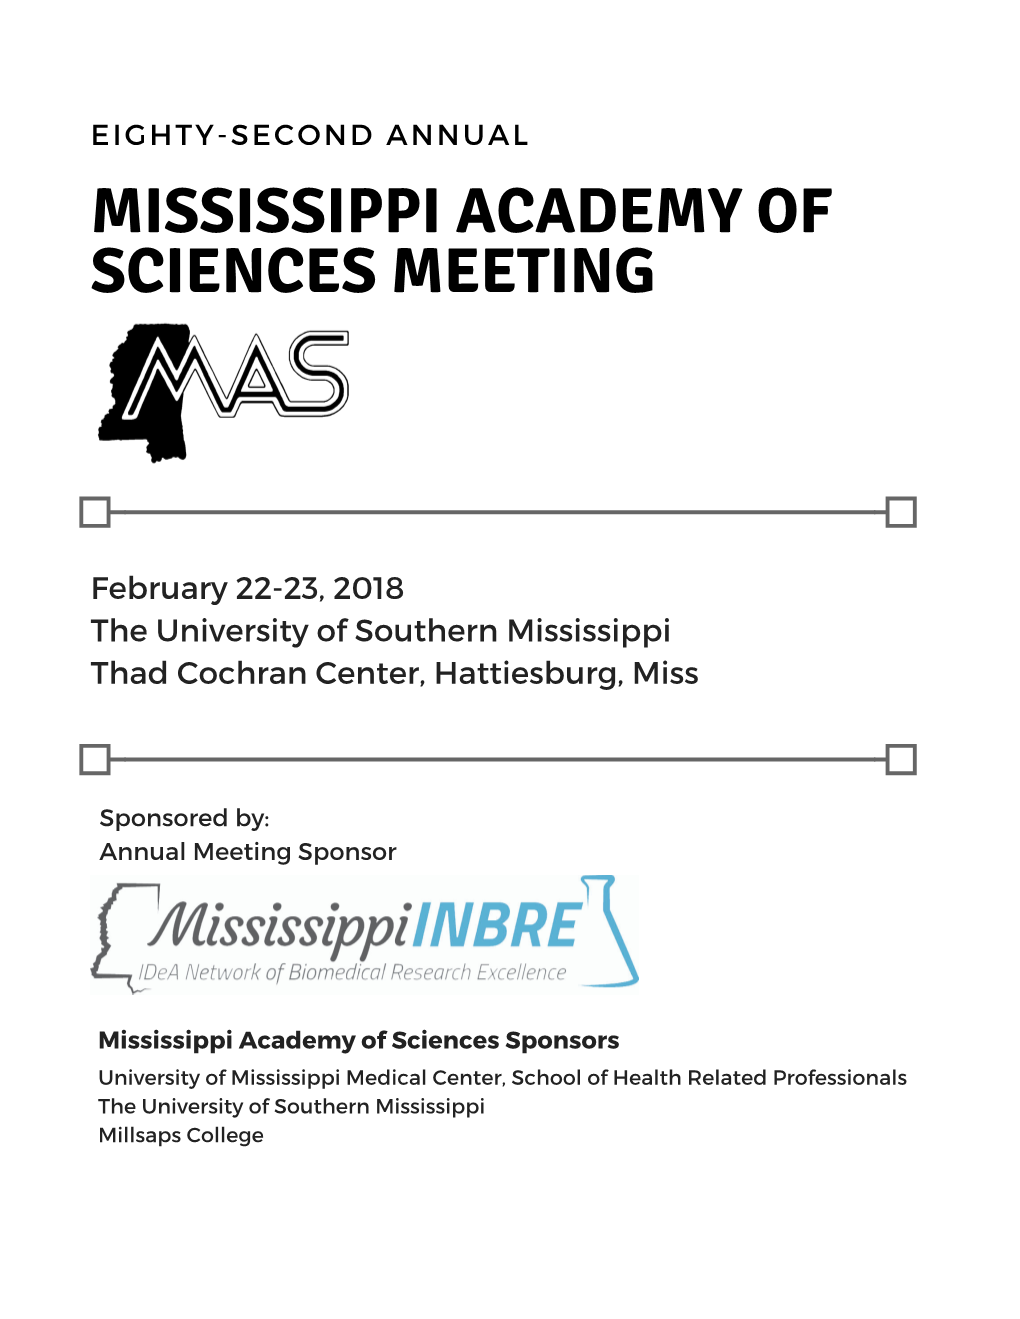 Eighty-Second Annual Mississippi Academy of Sciences Meeting